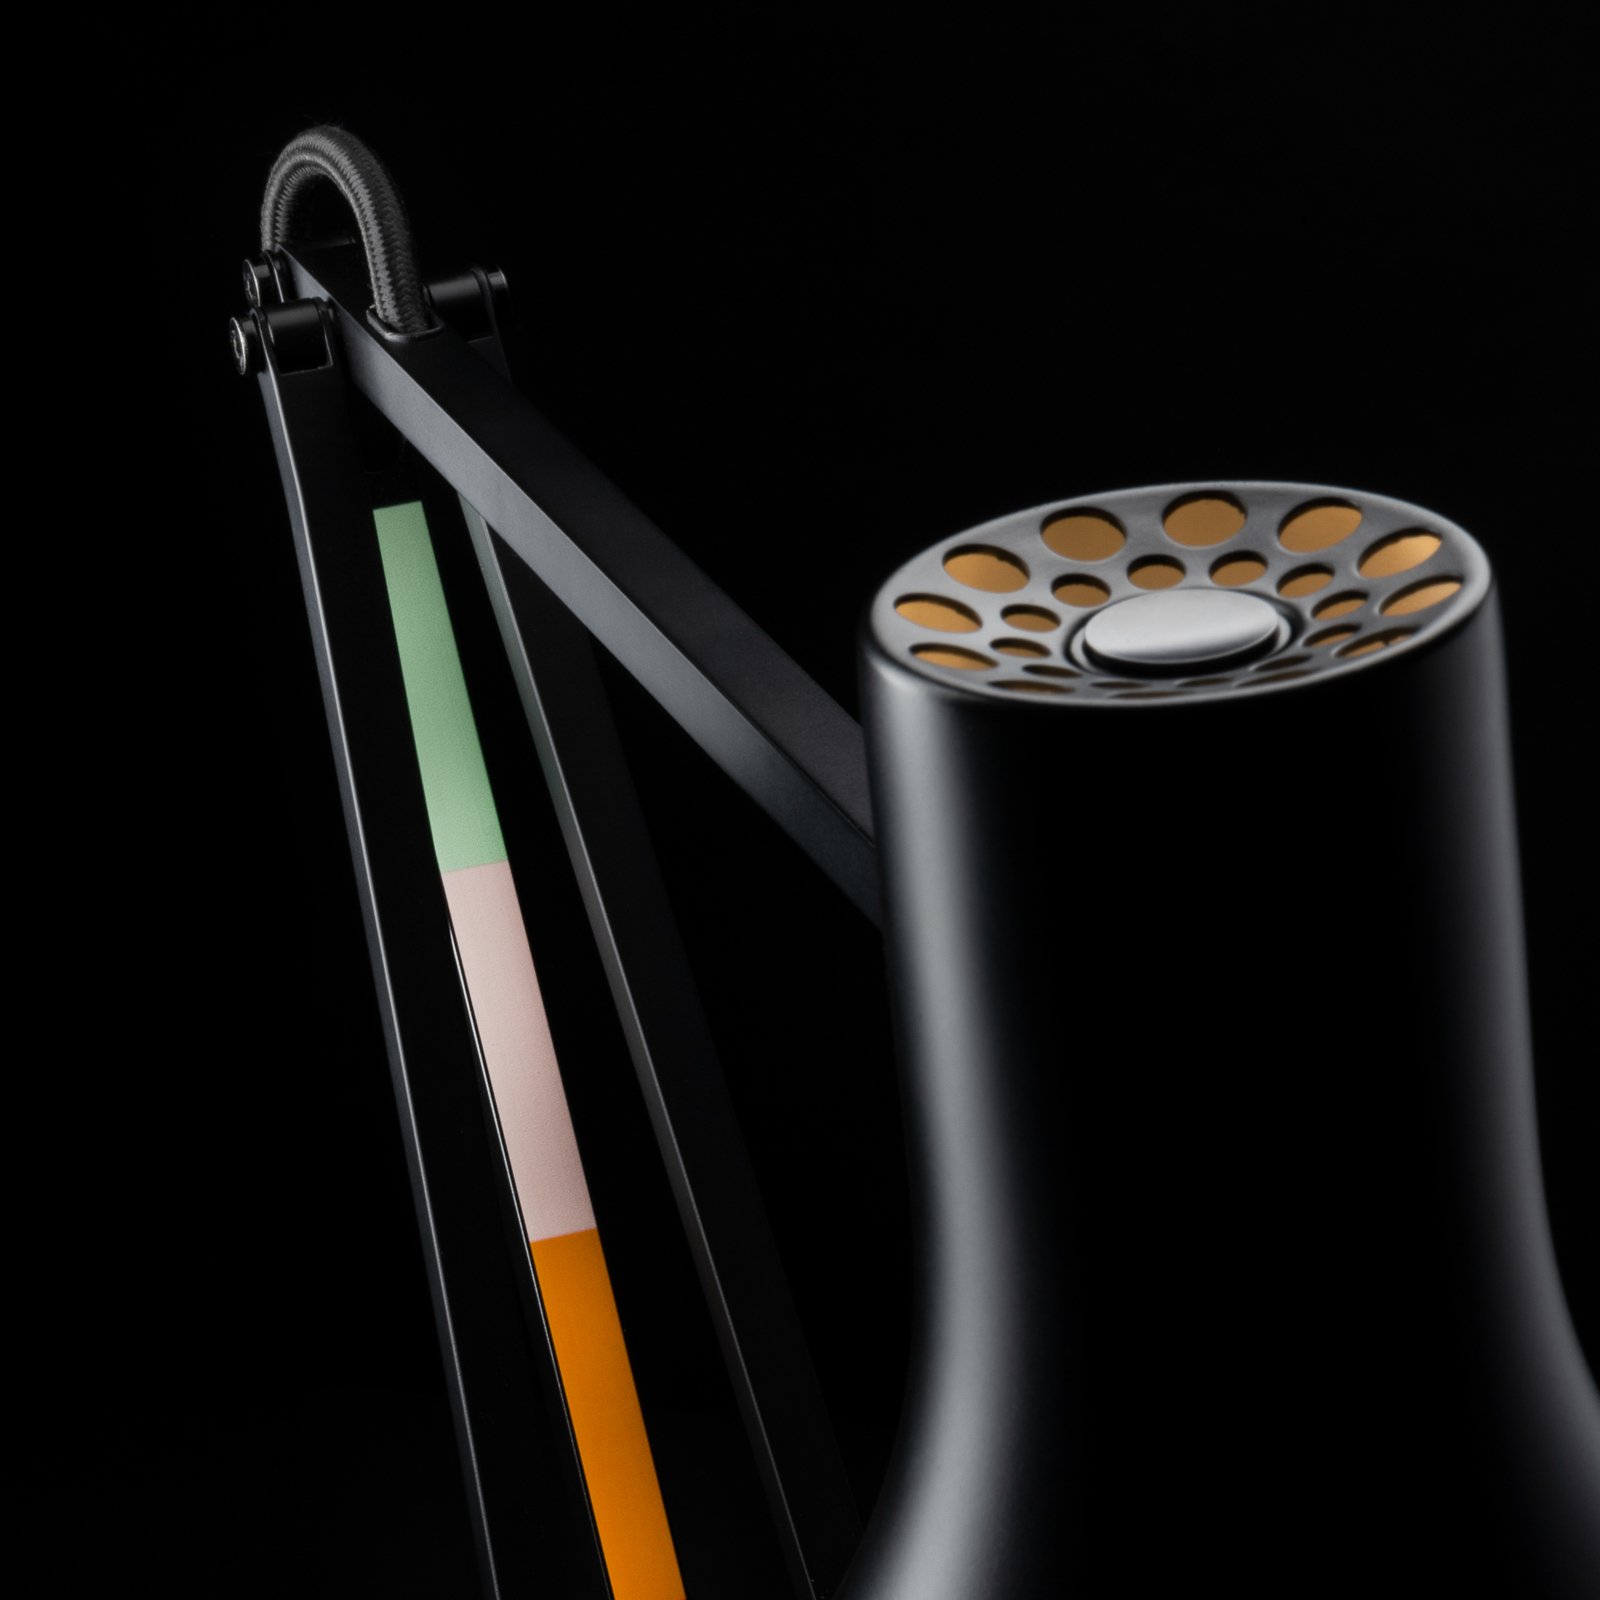 Anglepoise Type 75 Stehlampe Paul Smith Edition 5